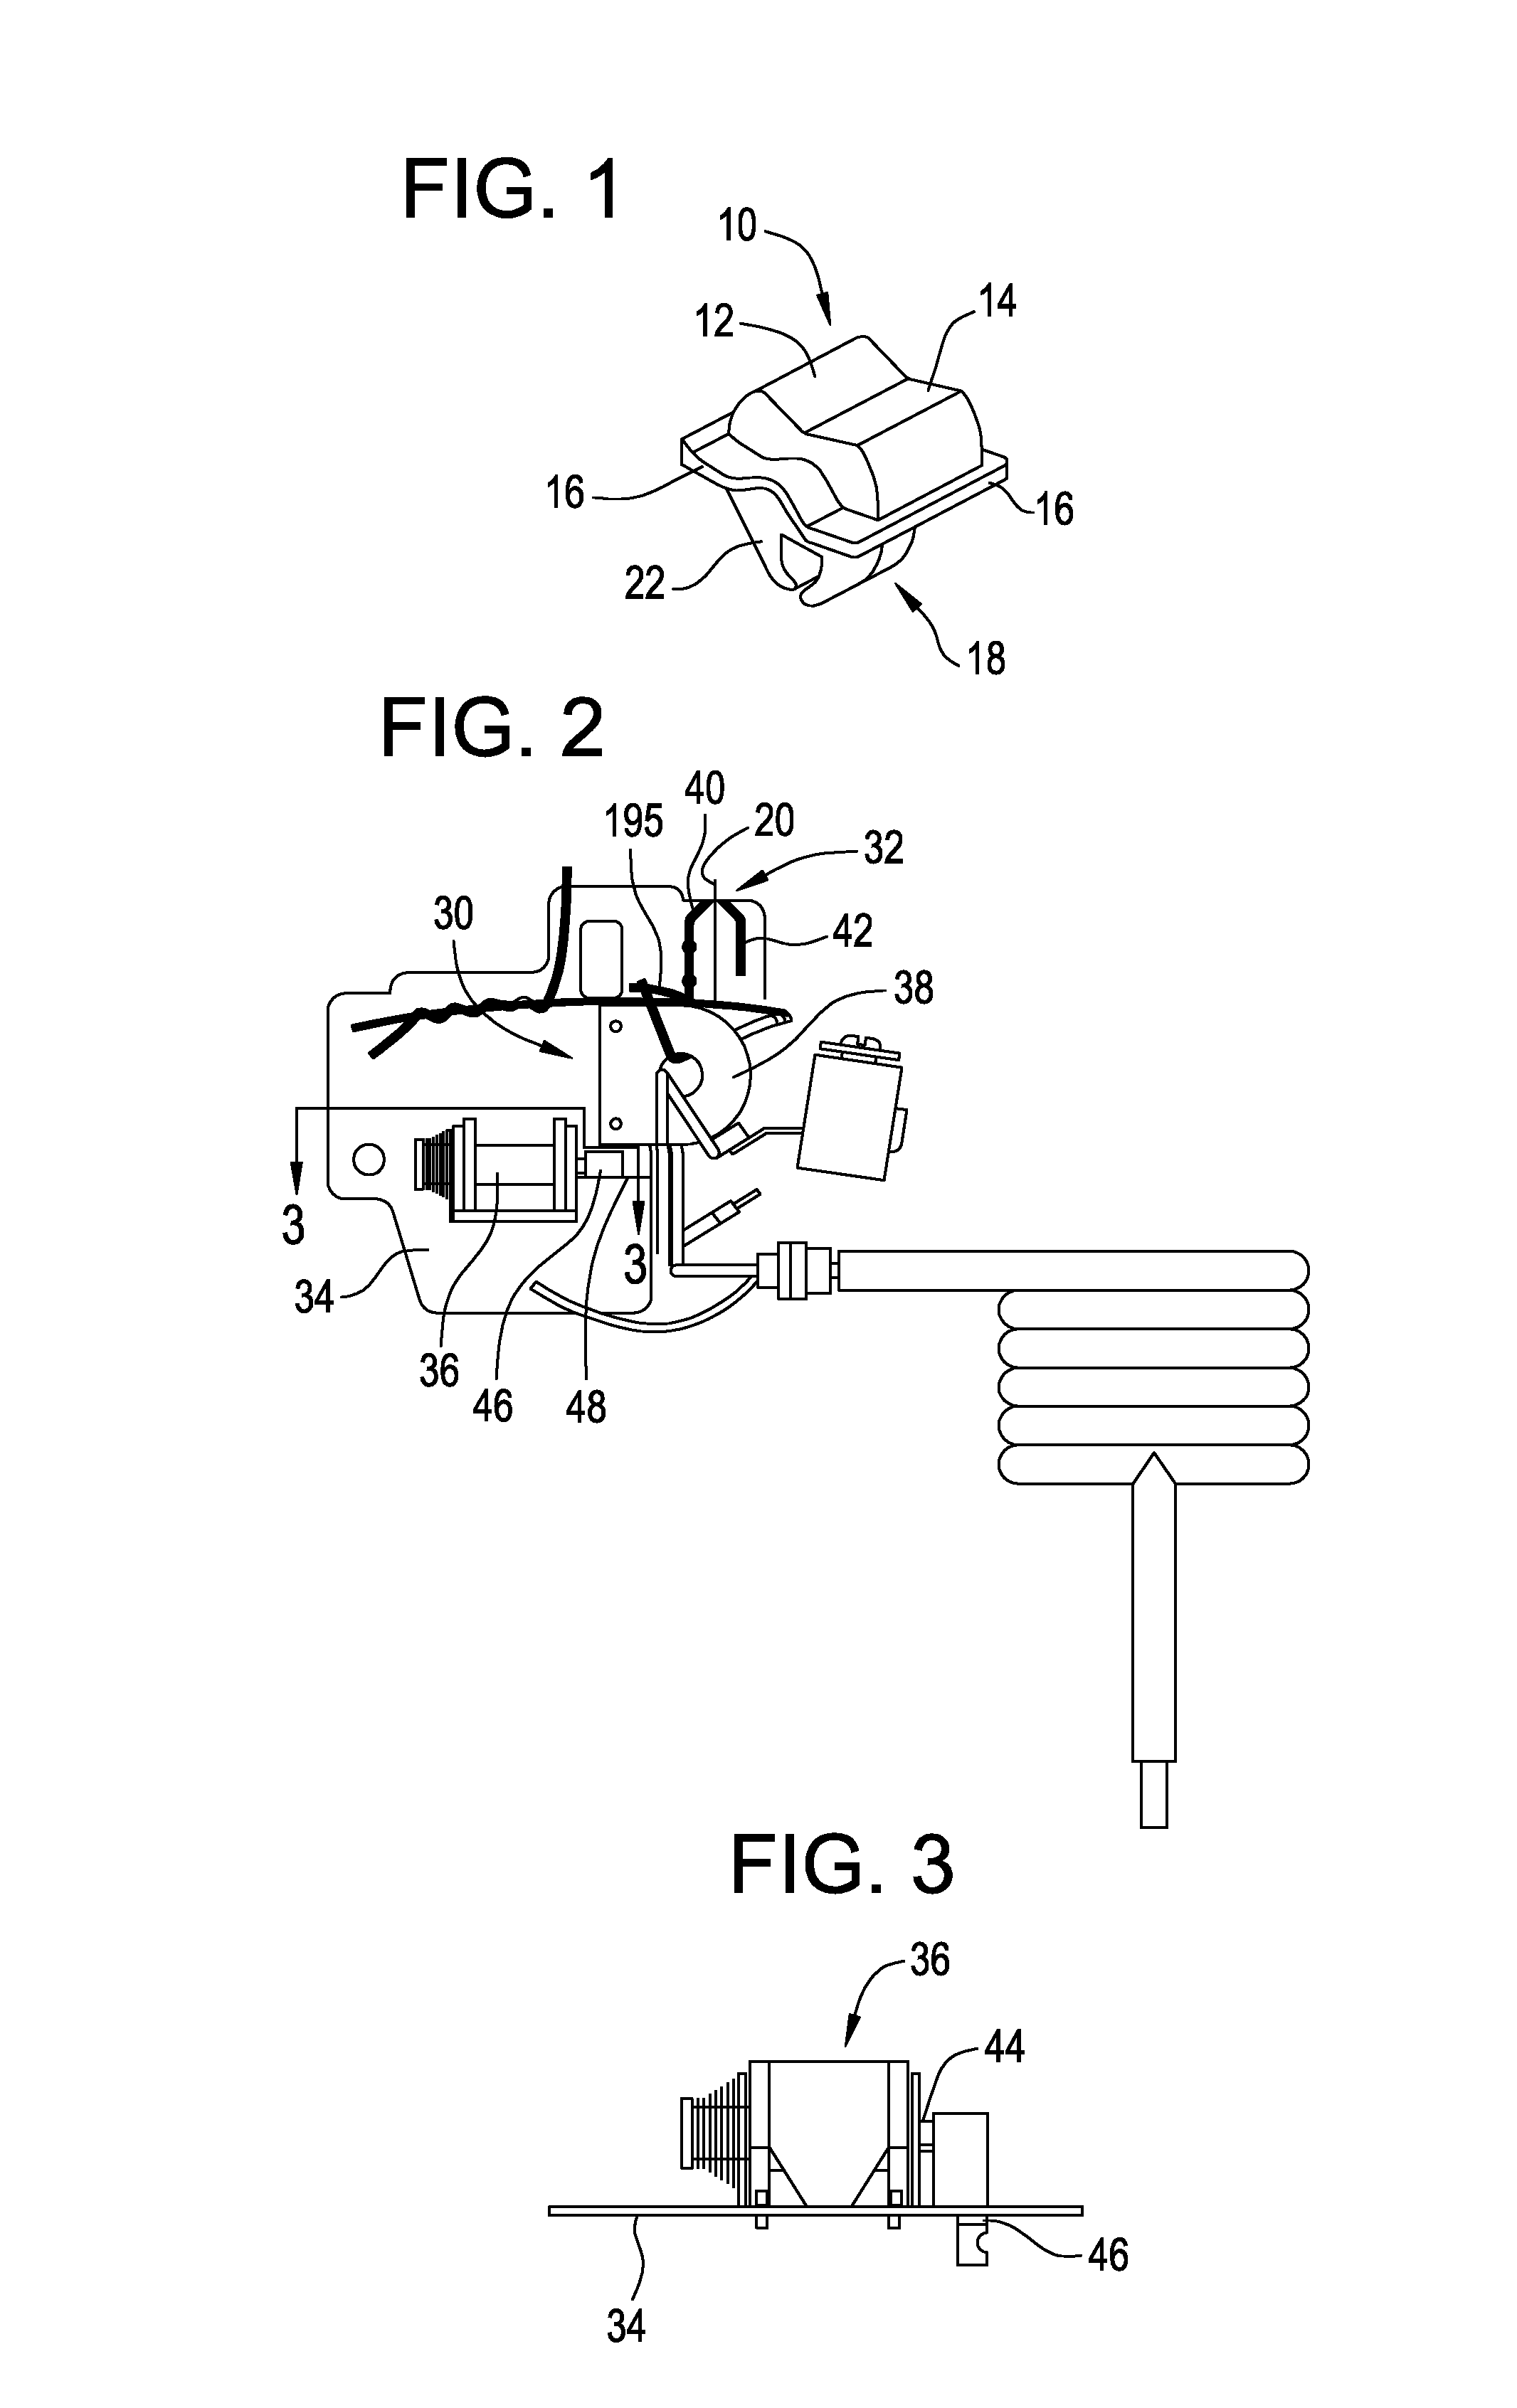 Circuit breaker with single test button mechanism